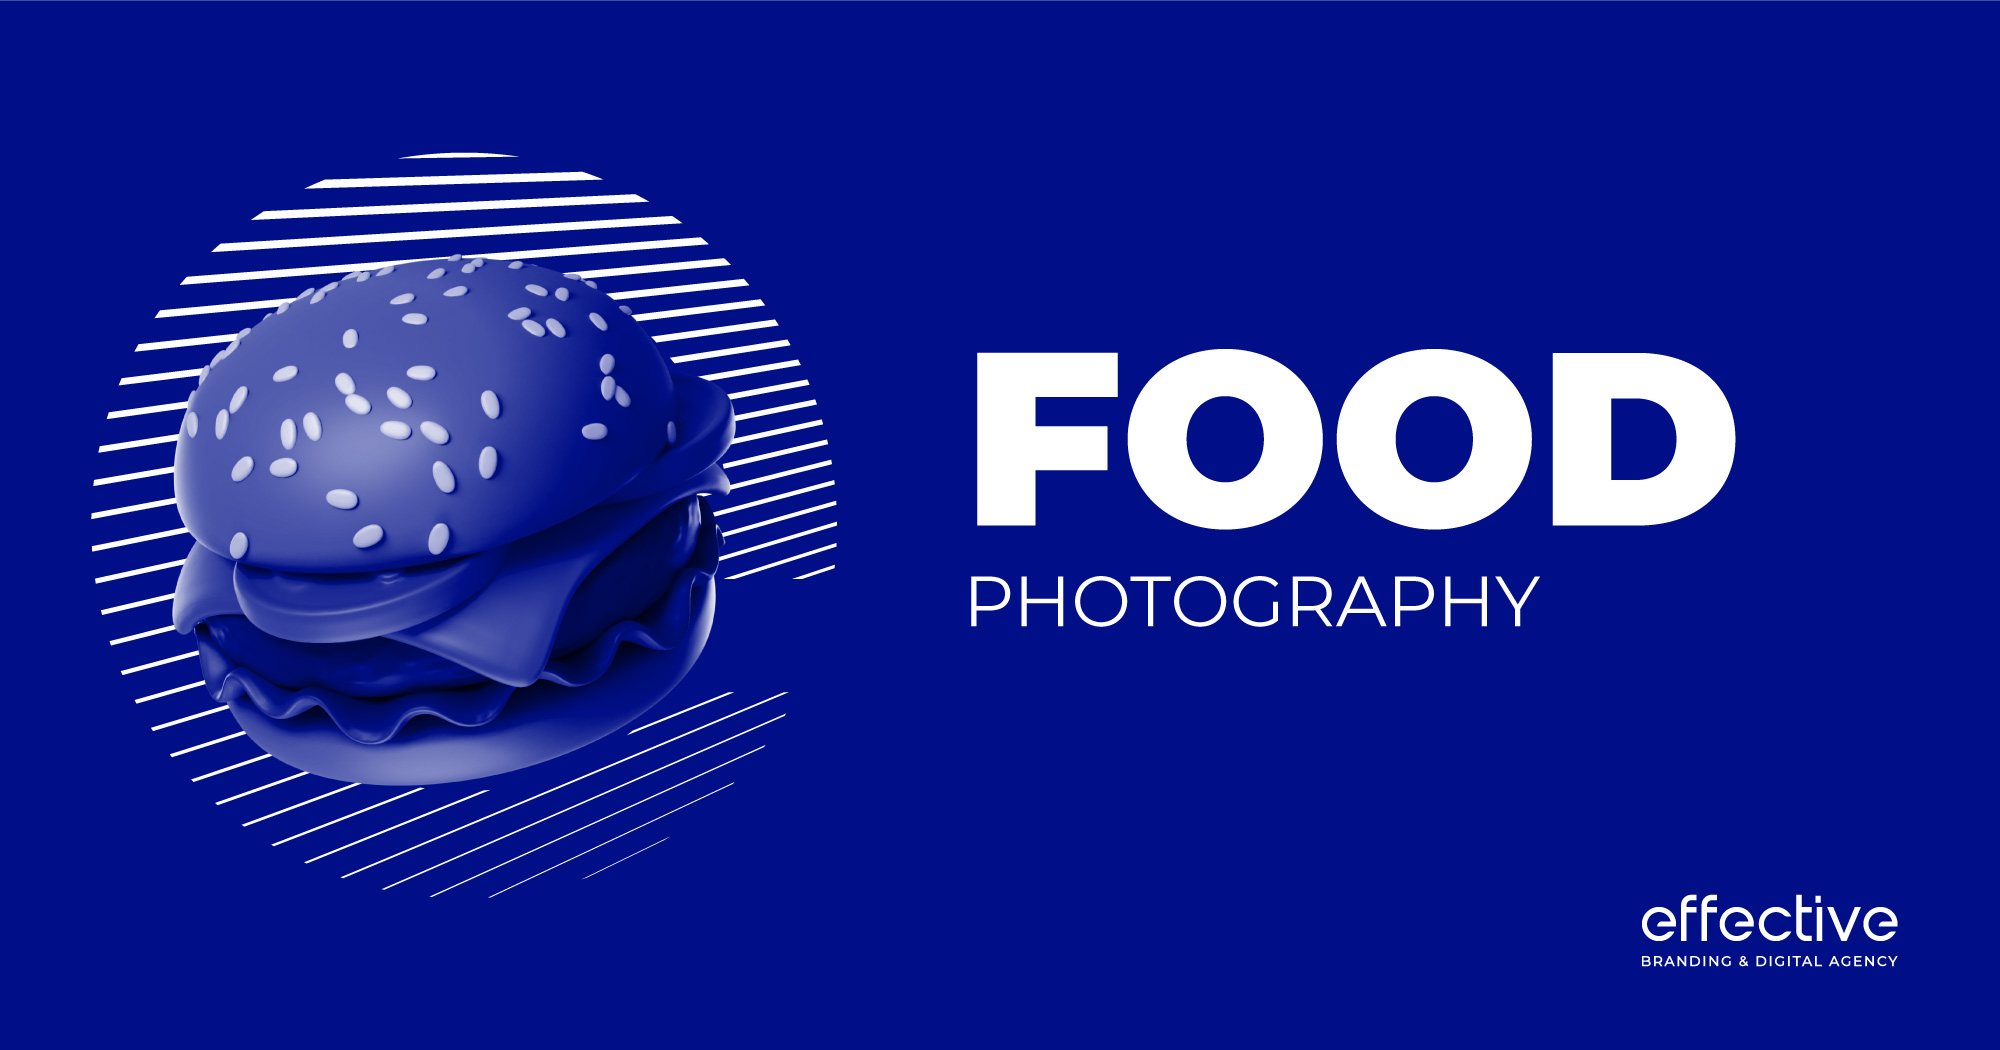 Best Food photography Services in the UAE